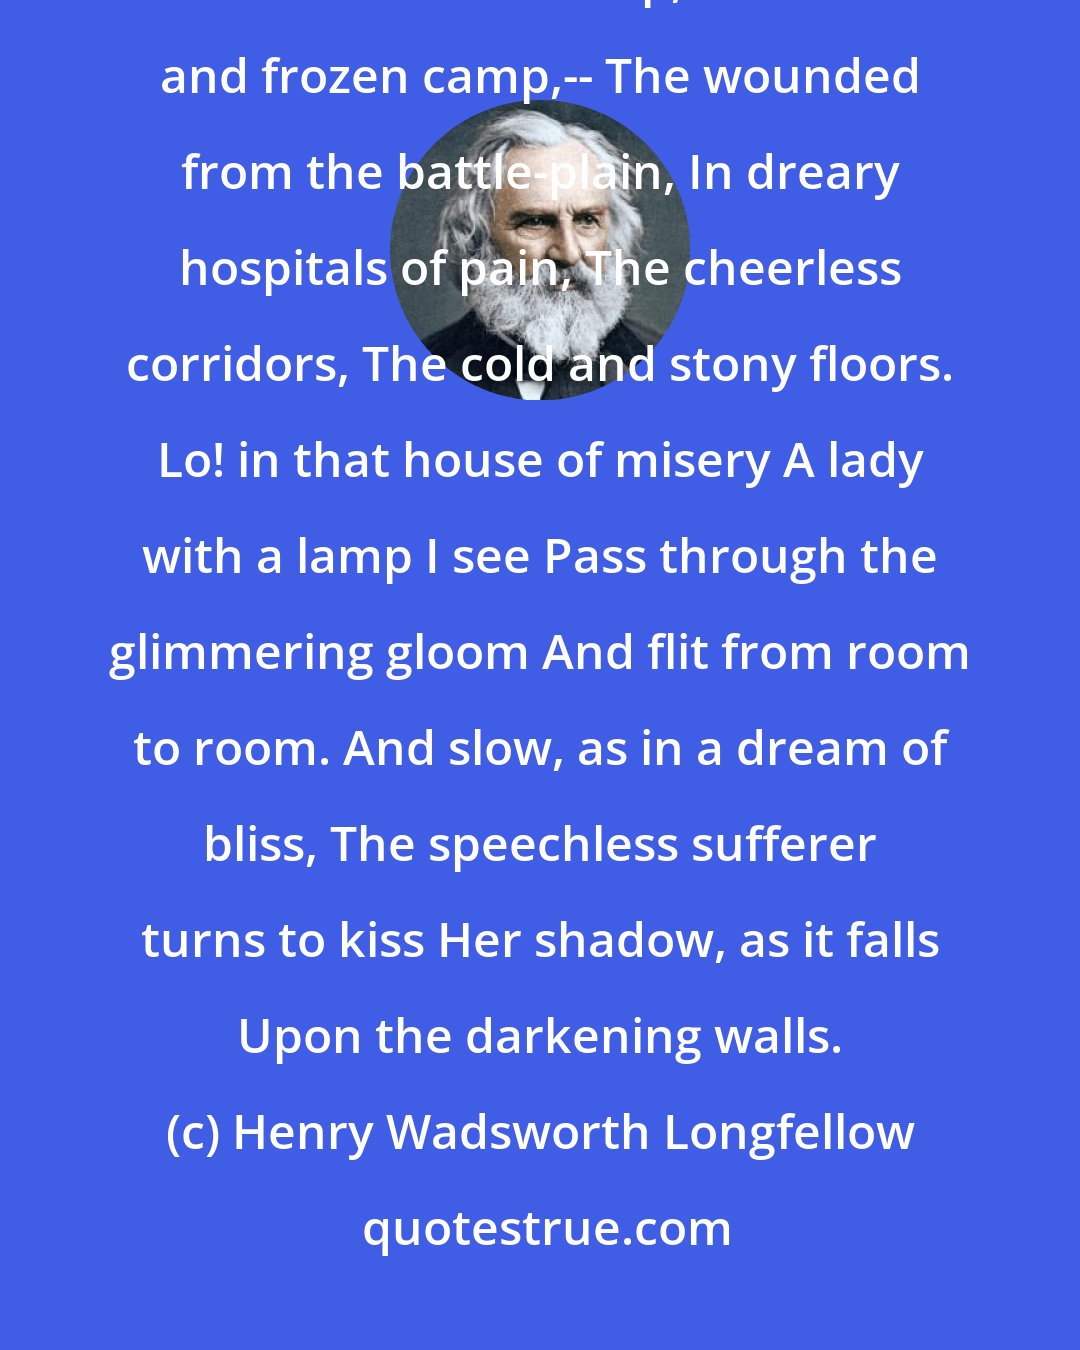 Henry Wadsworth Longfellow: Thus thought I, as by night I read Of the great army of the dead, The trenches cold and damp, The starved and frozen camp,-- The wounded from the battle-plain, In dreary hospitals of pain, The cheerless corridors, The cold and stony floors. Lo! in that house of misery A lady with a lamp I see Pass through the glimmering gloom And flit from room to room. And slow, as in a dream of bliss, The speechless sufferer turns to kiss Her shadow, as it falls Upon the darkening walls.